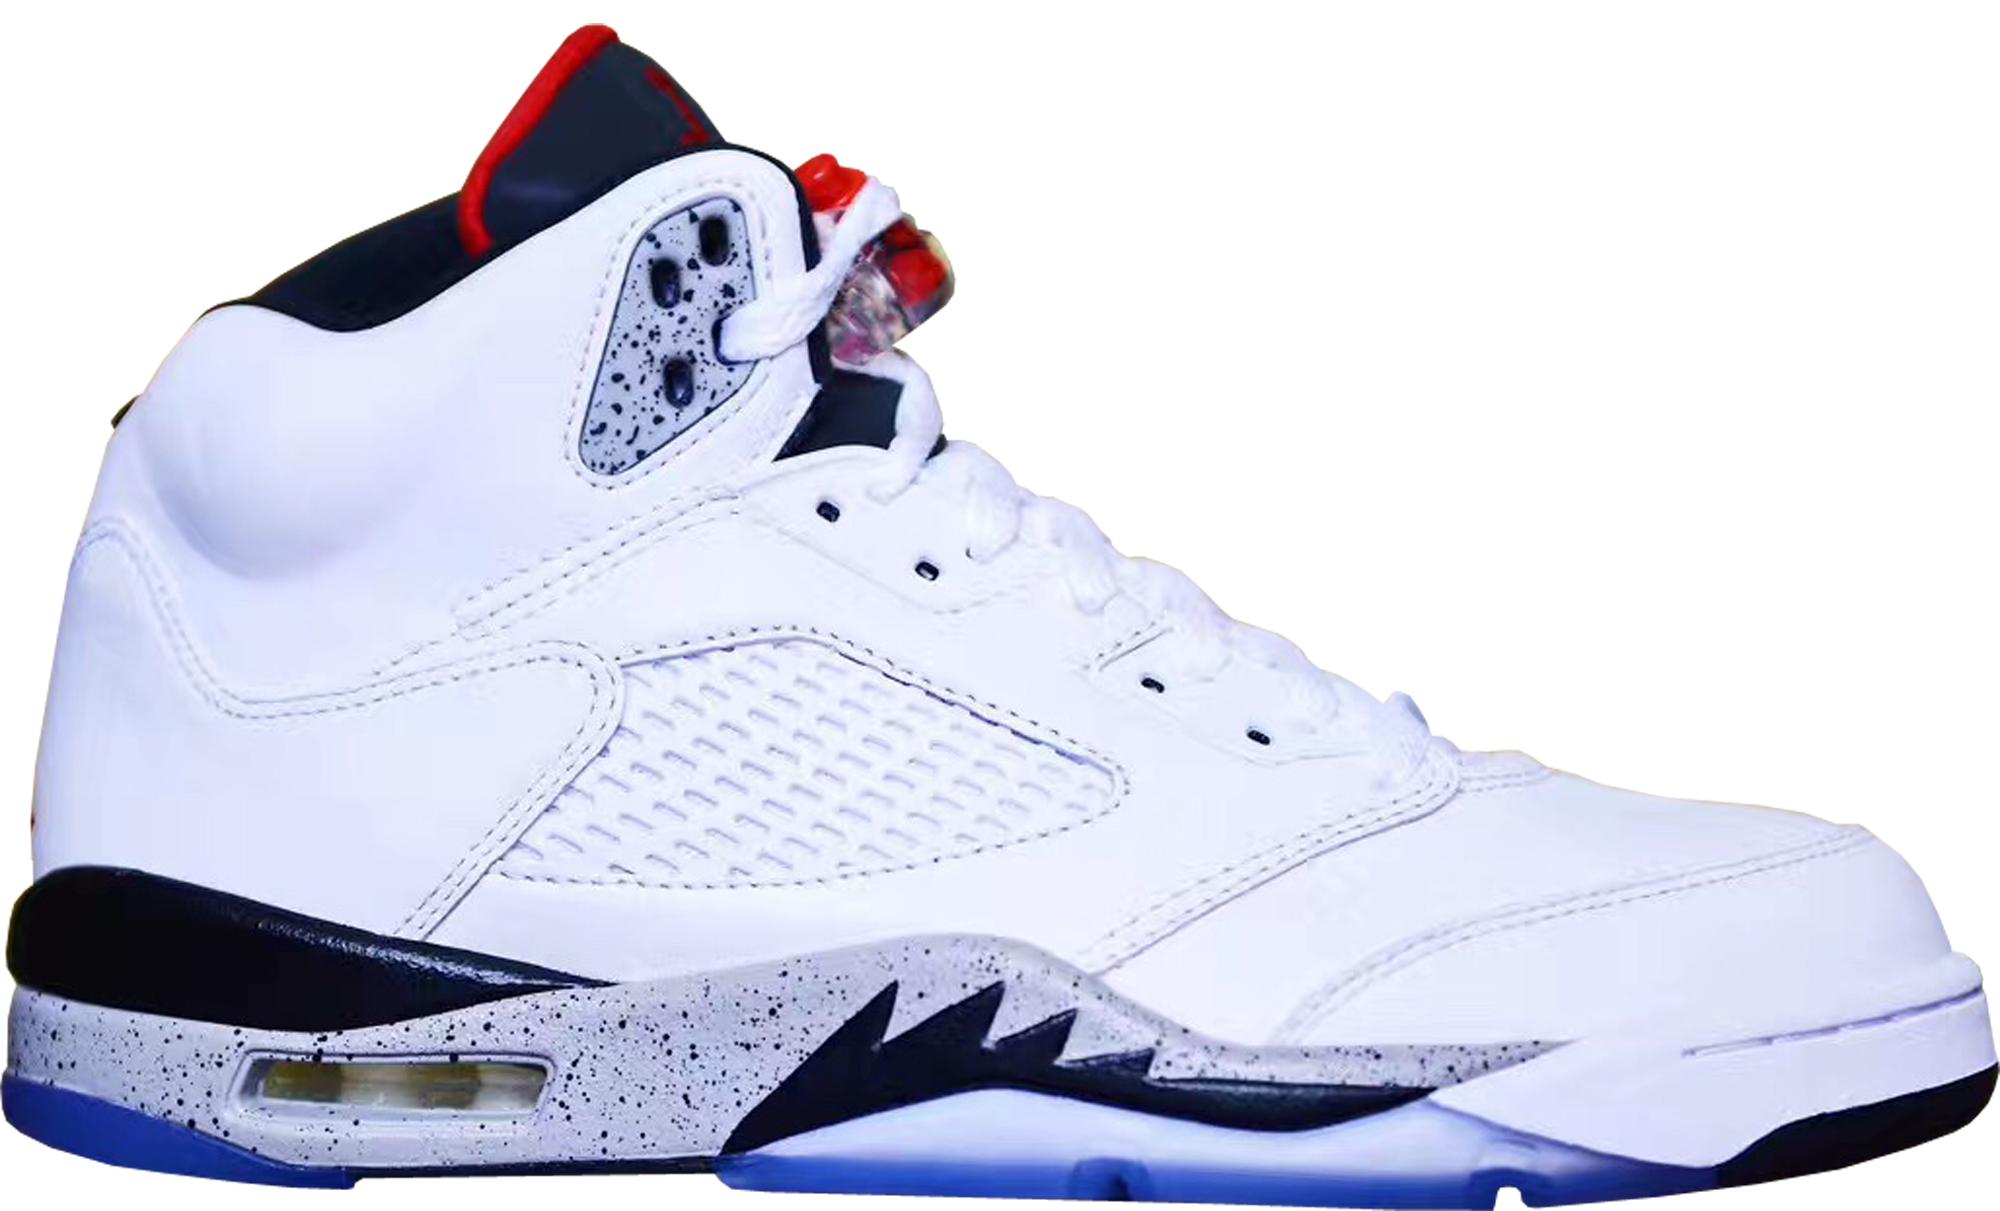 Get The Air Jordan 5 White Cement For The Whole Family Now